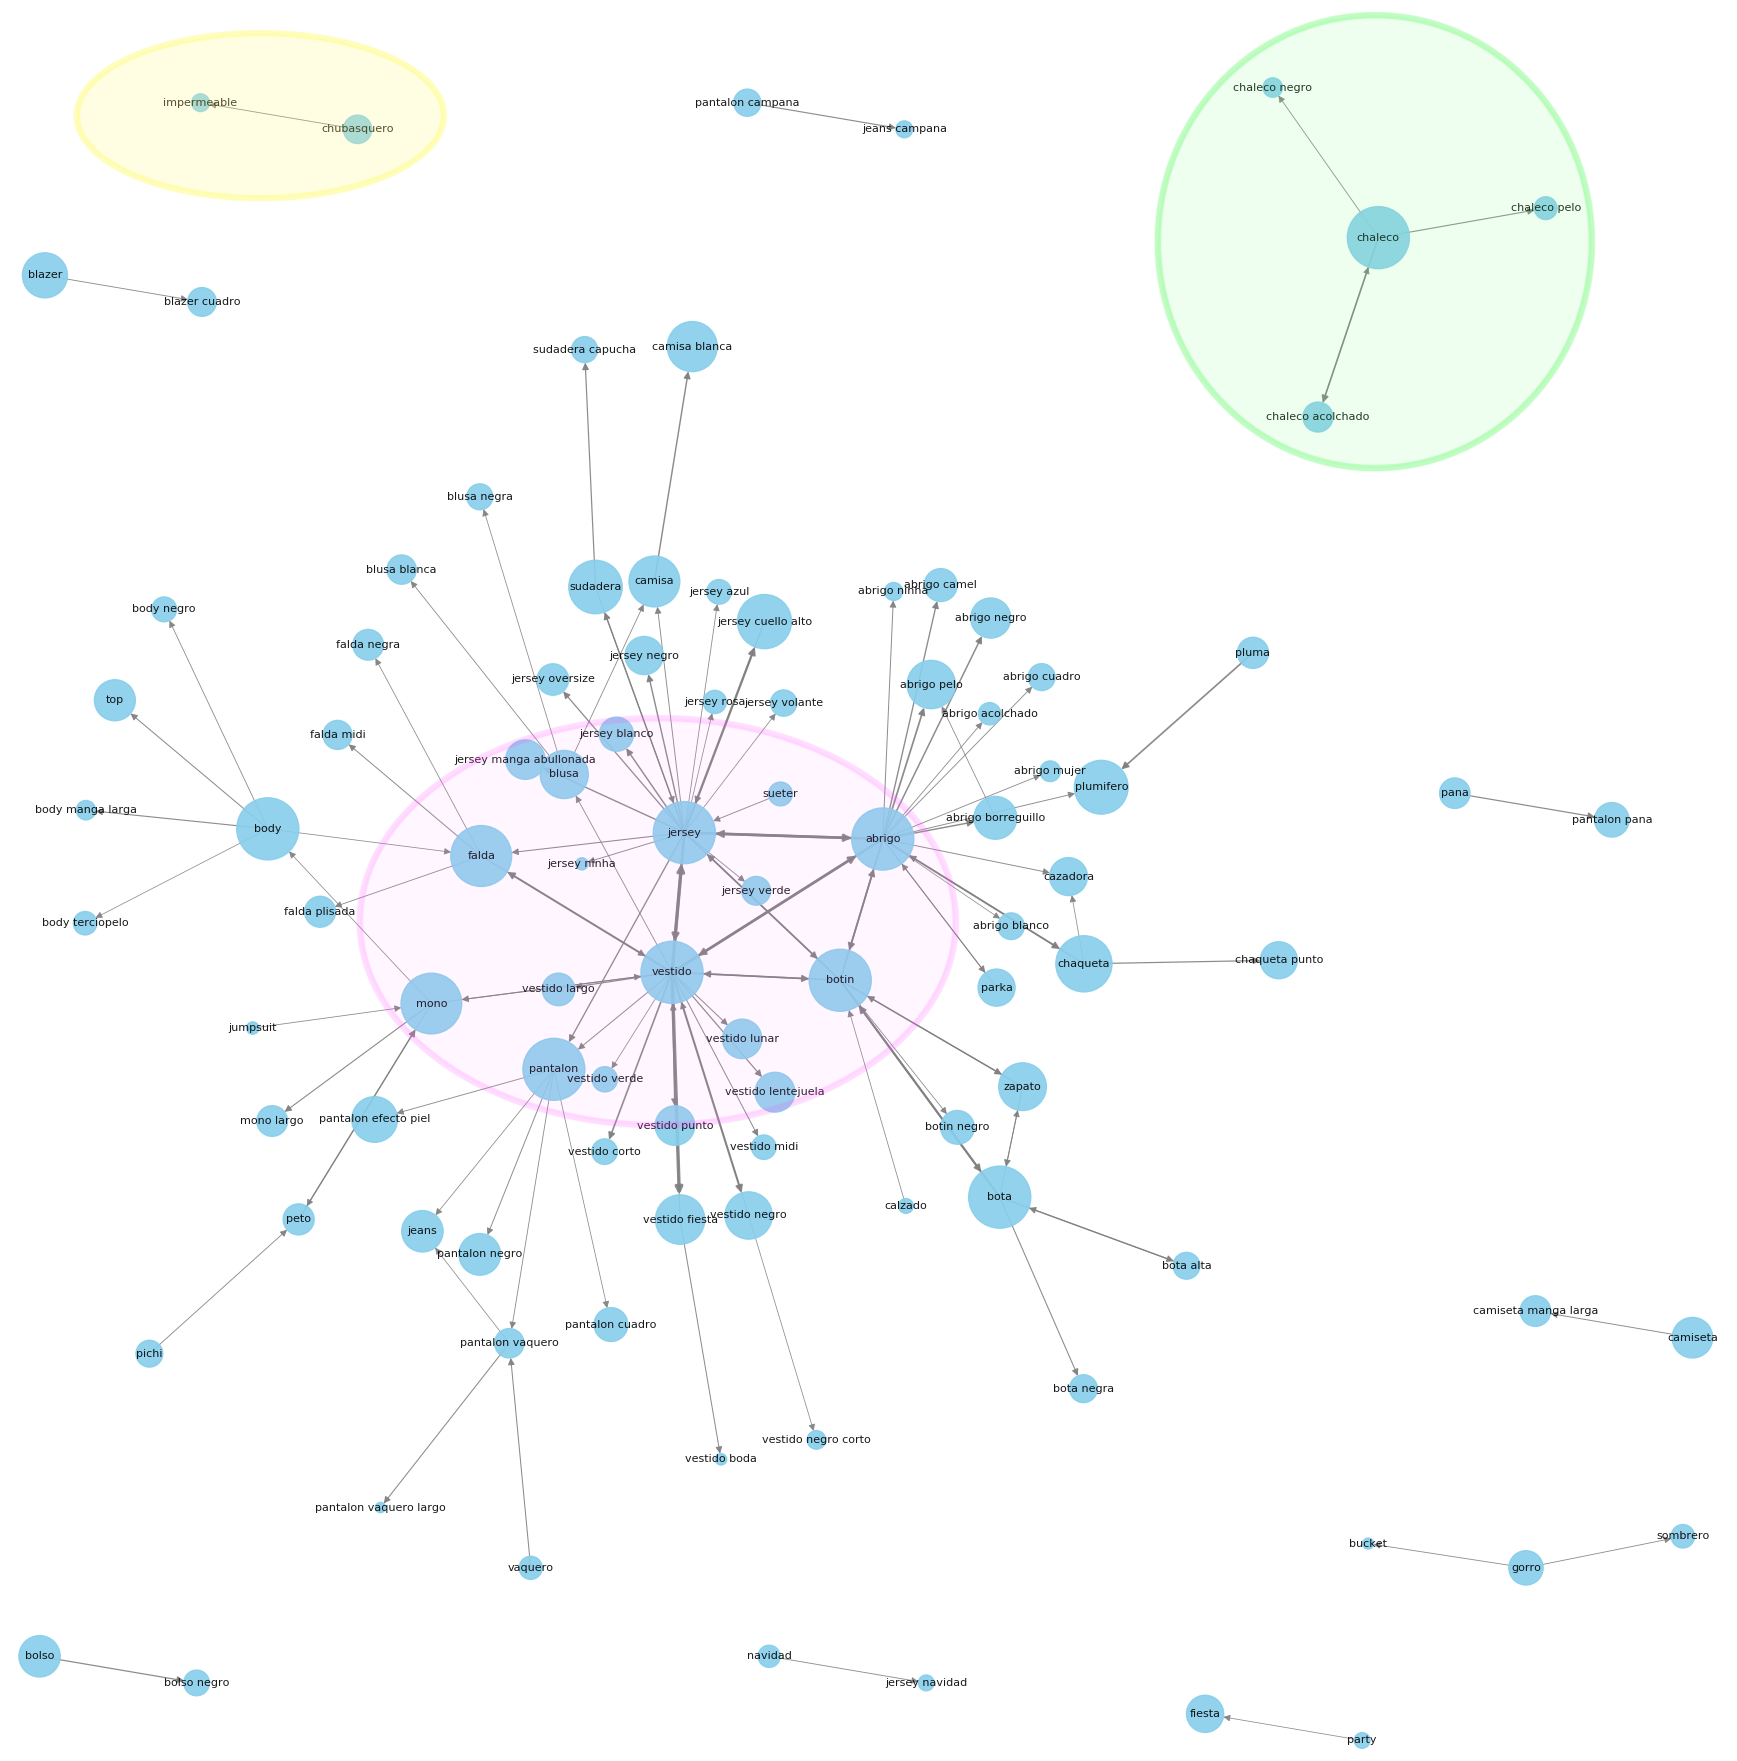 Graph representing fashion shop data composed of a main cluster with the most popular search terms (pink) and outliers corresponding mainly to refinement queries (green) or synonyms (yellow).